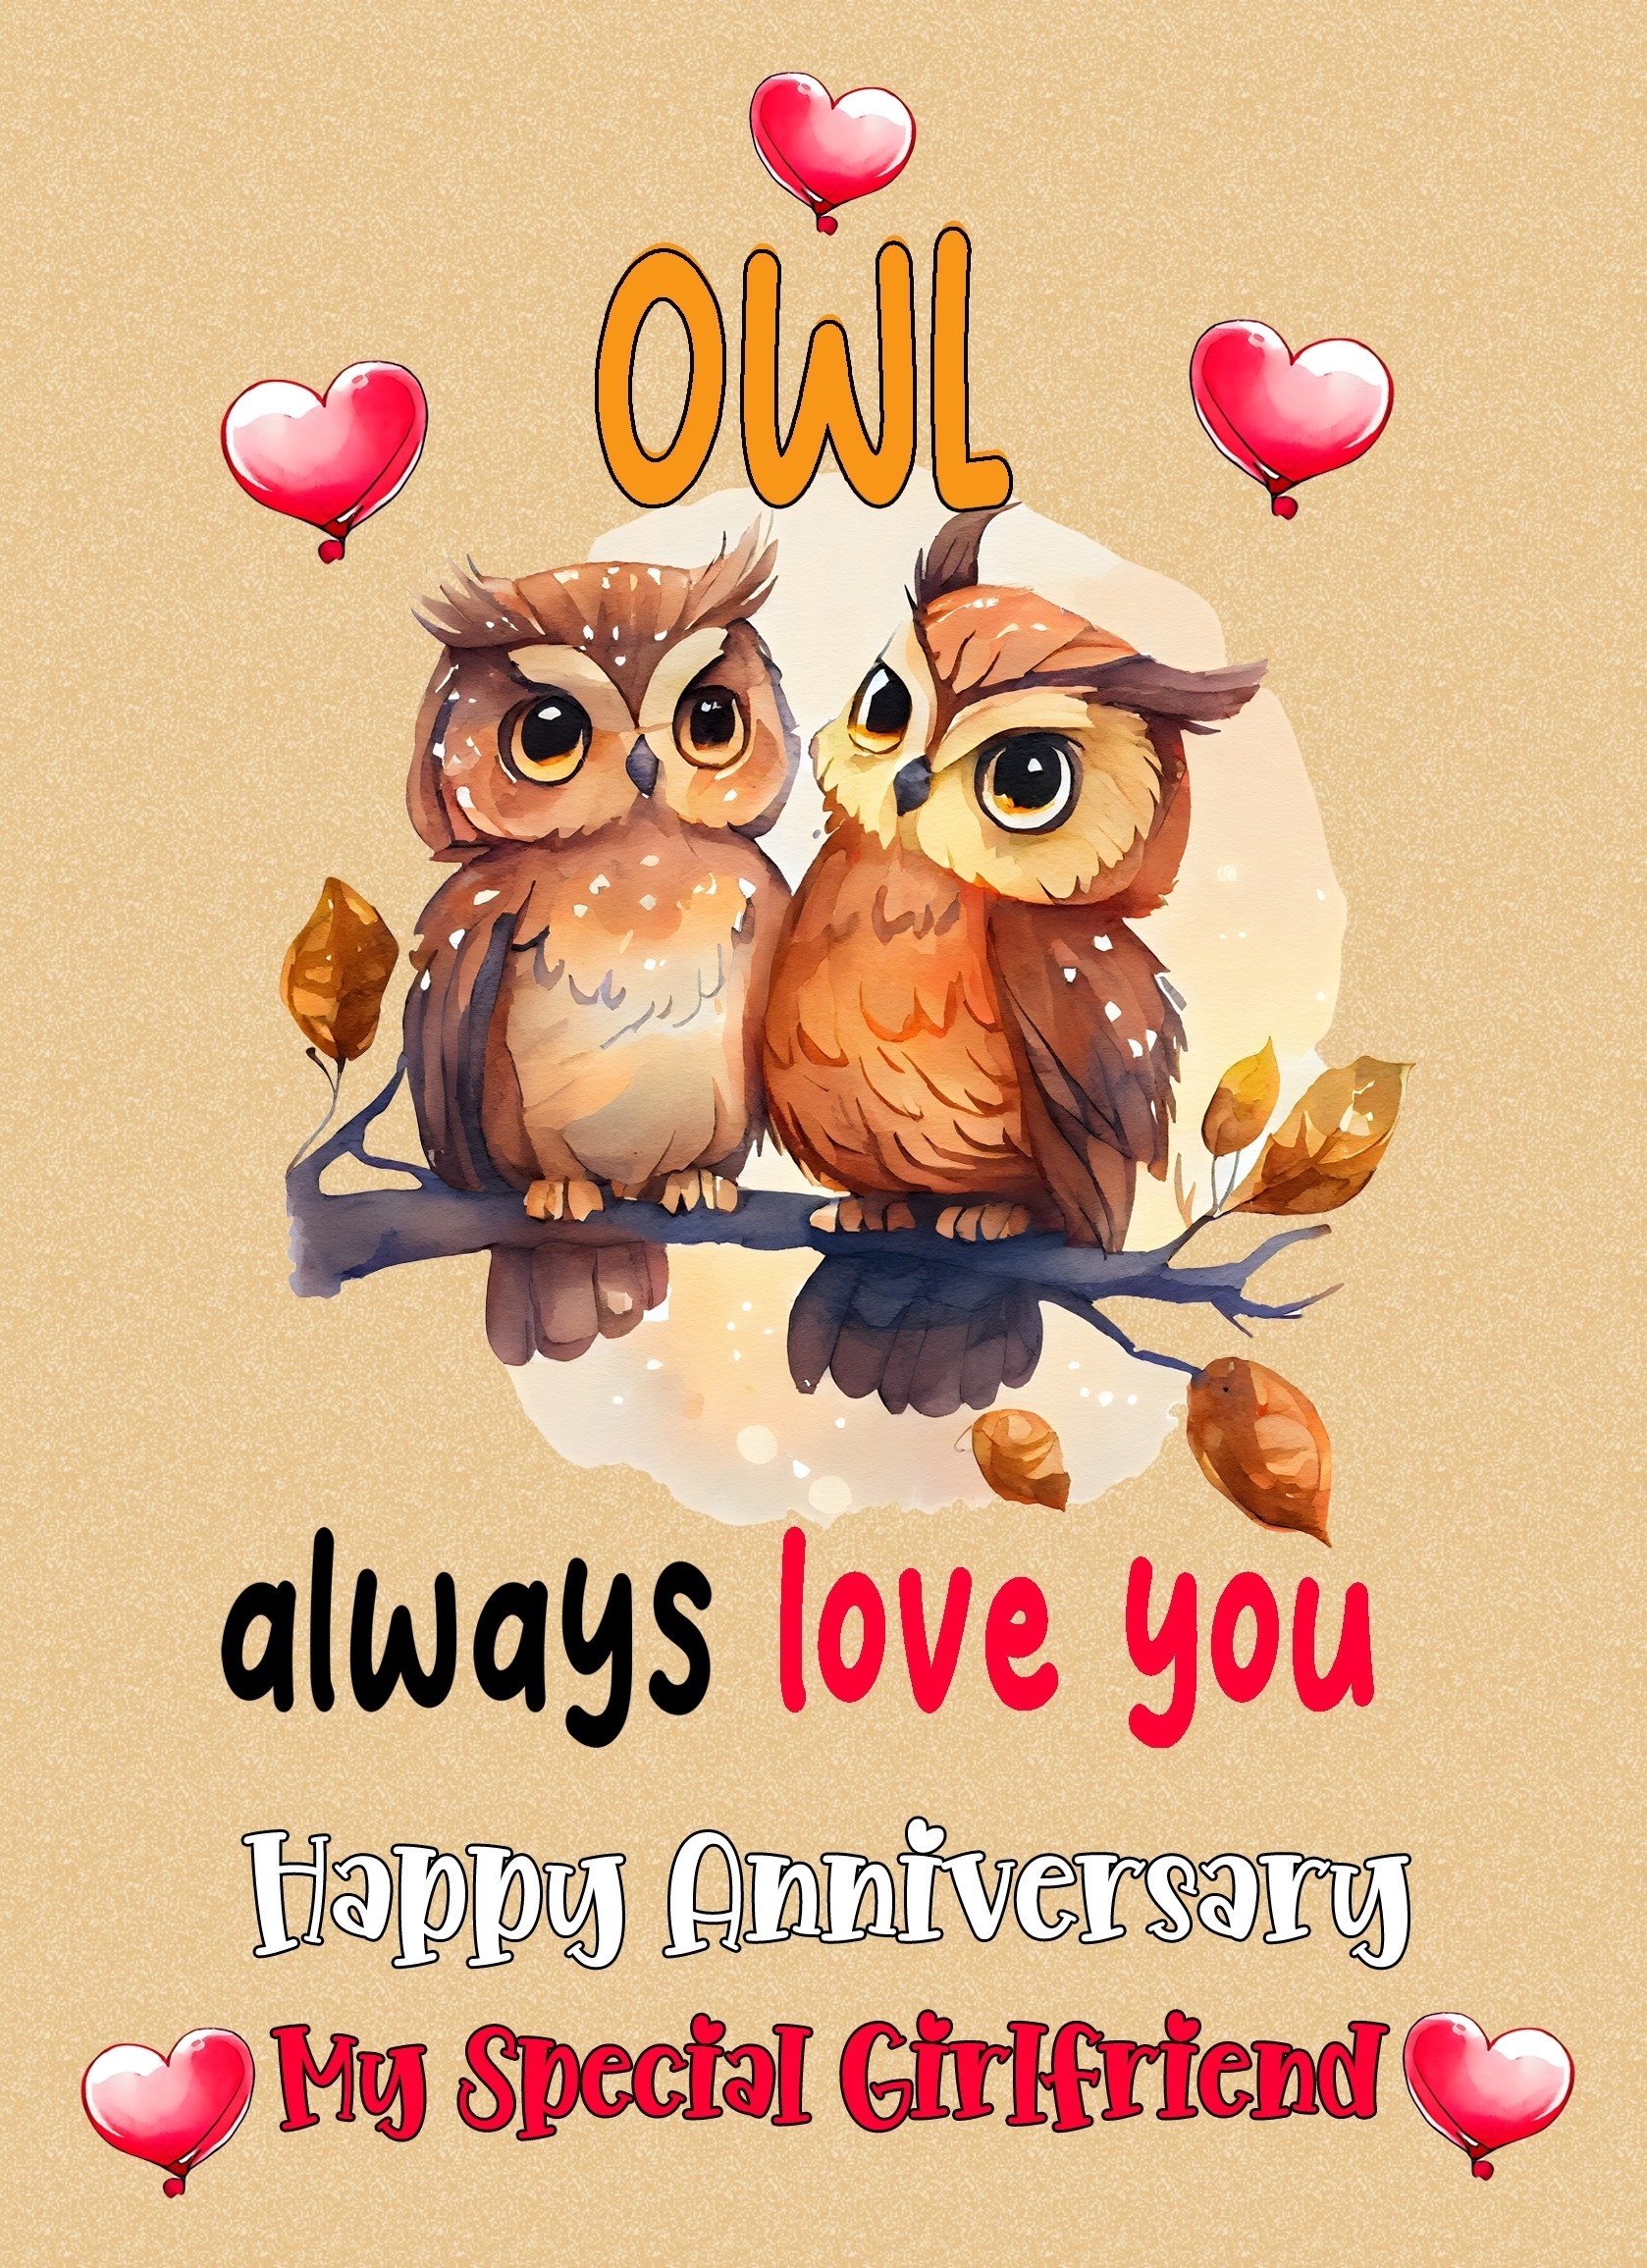 Funny Pun Romantic Anniversary Card for Girlfriend (Owl Always Love You)